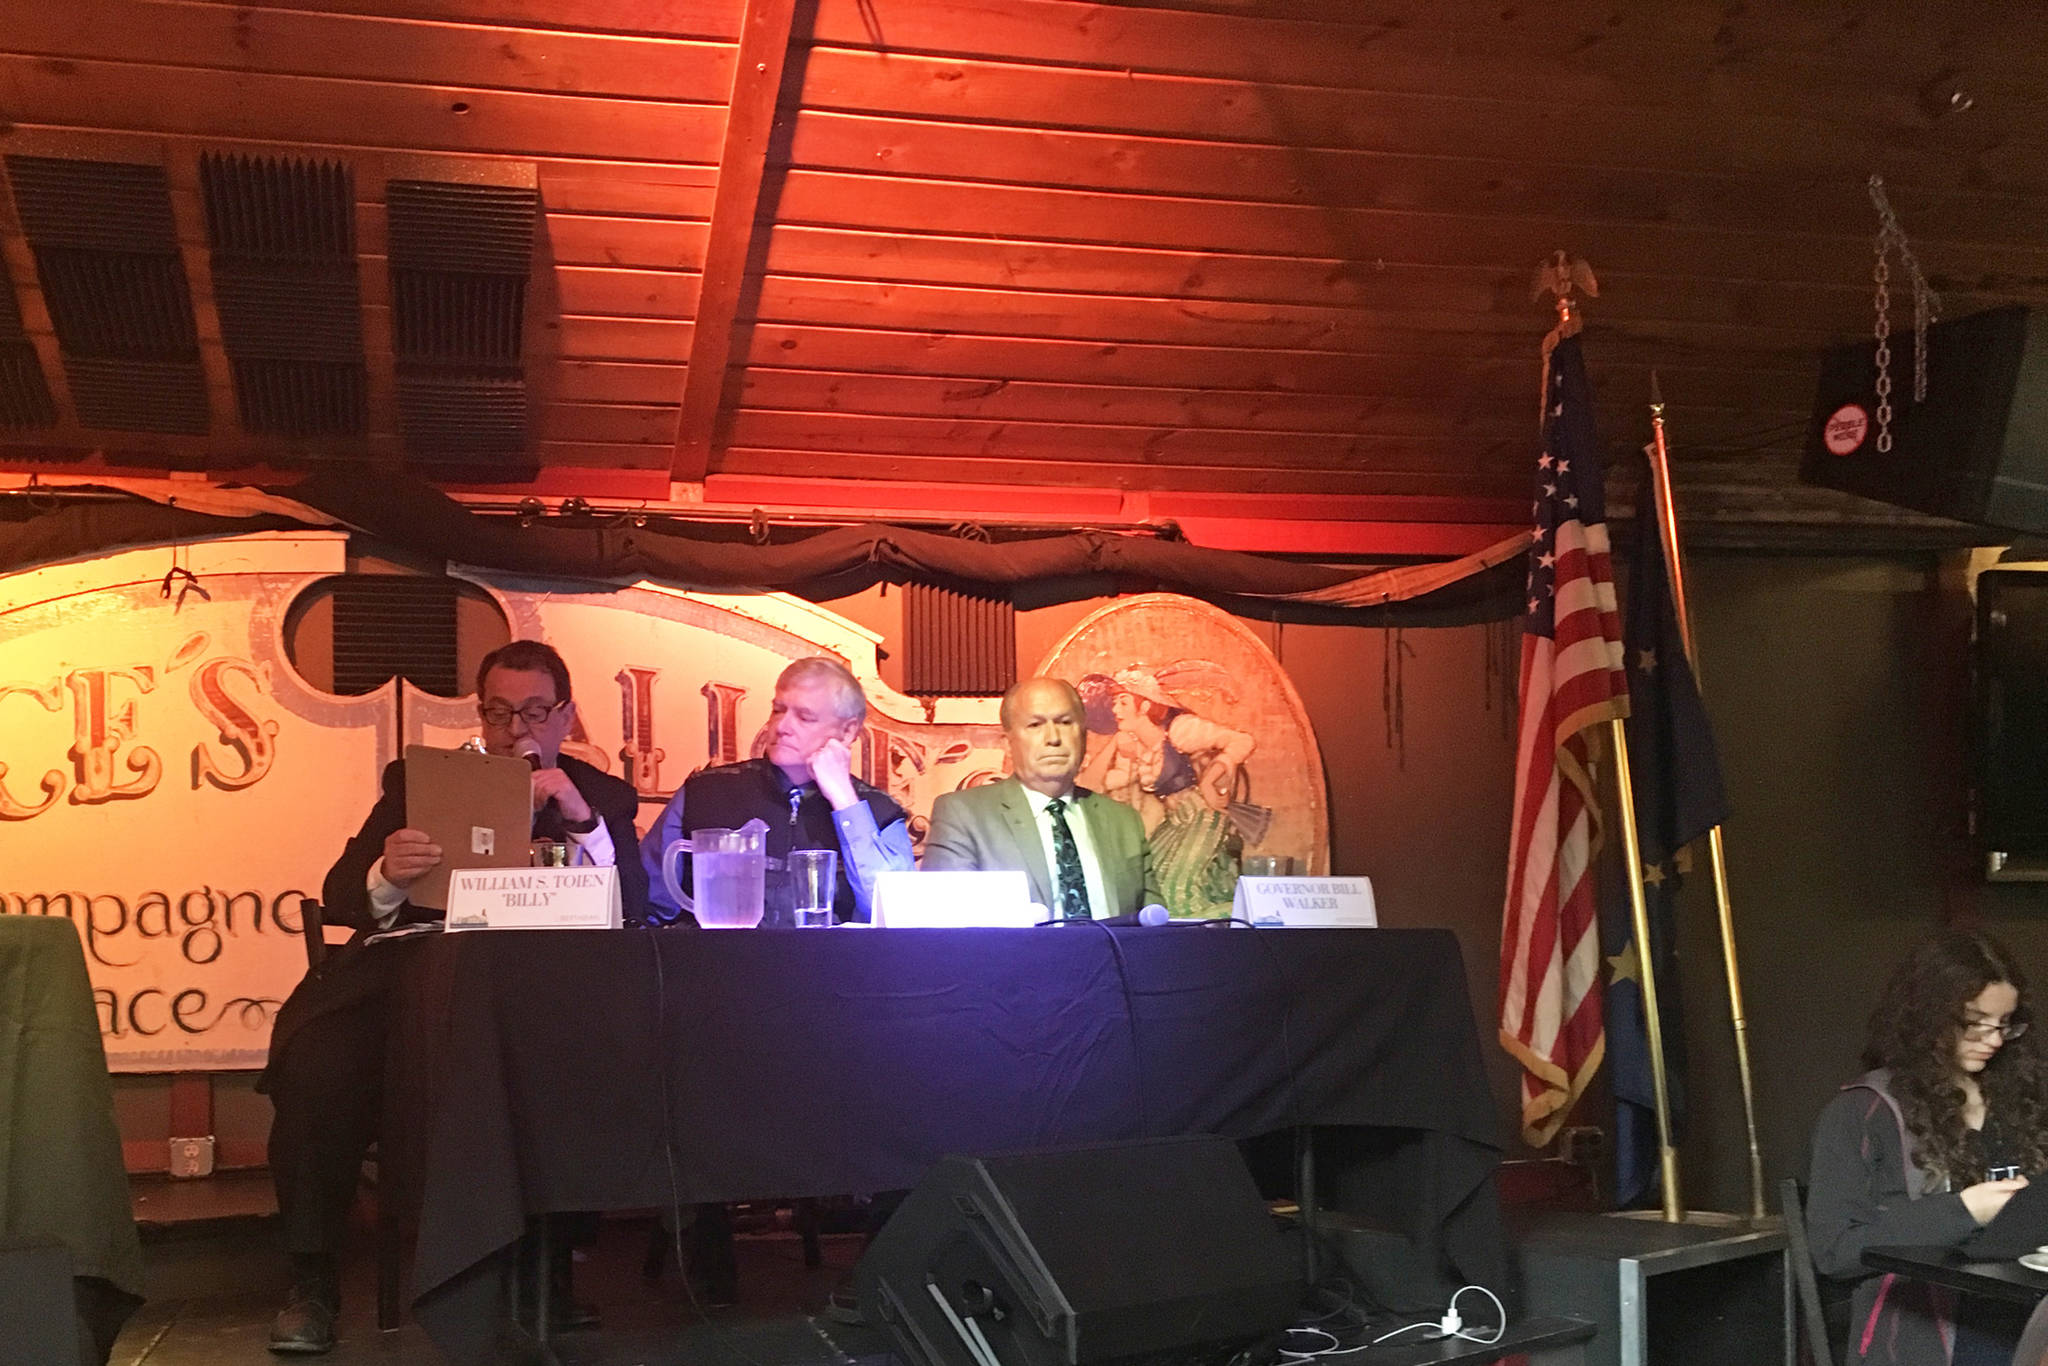 From left to right: Candidates for Alaska governor William Toien, Mead Treadwell and current Governor Bill Walker participate in a forum Tuesday, Aug. 14, 2018 held at Alice’s Champagne Palace in Homer, Alaska. They are joined in the race by Democrat Mark Begich and Republican Mike Dunleavy. (Photo by Megan Pacer/Homer News)